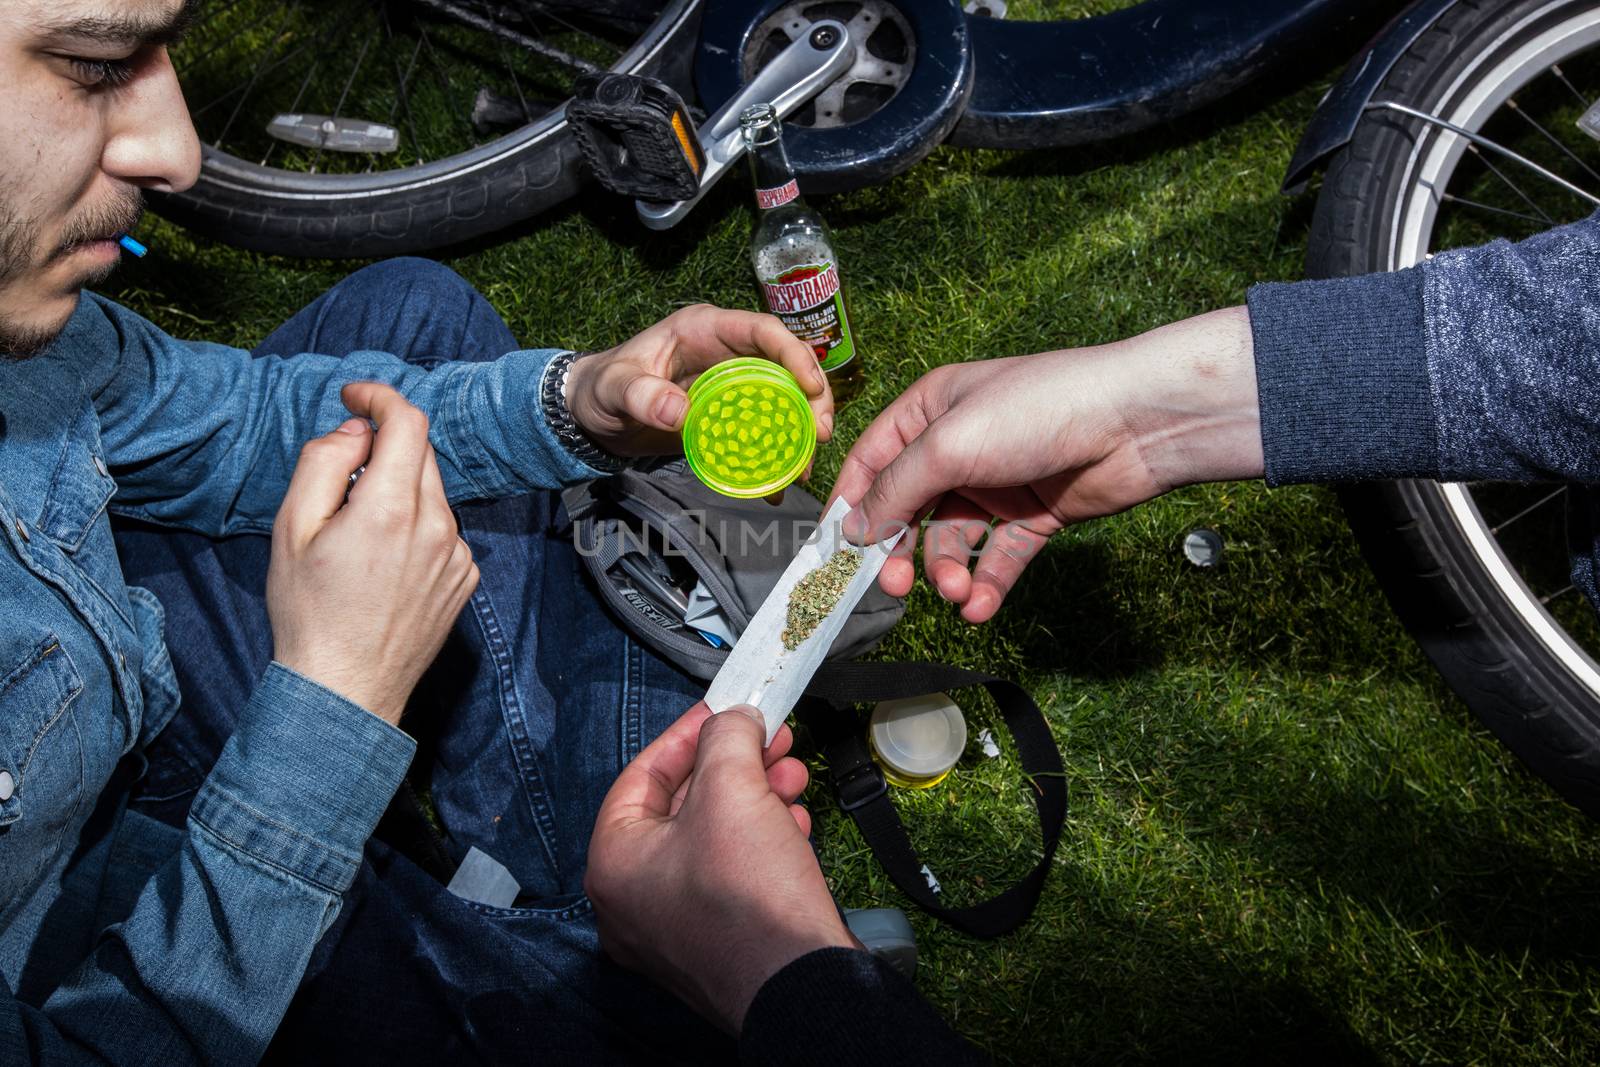 UNITED-KINGDOM, London: Men prepare a reefer as hundreds of pro-cannabis supporters gather in Hyde Park, in London for 4/20 day, a giant annual smoke-in  on April 20, 2016. 